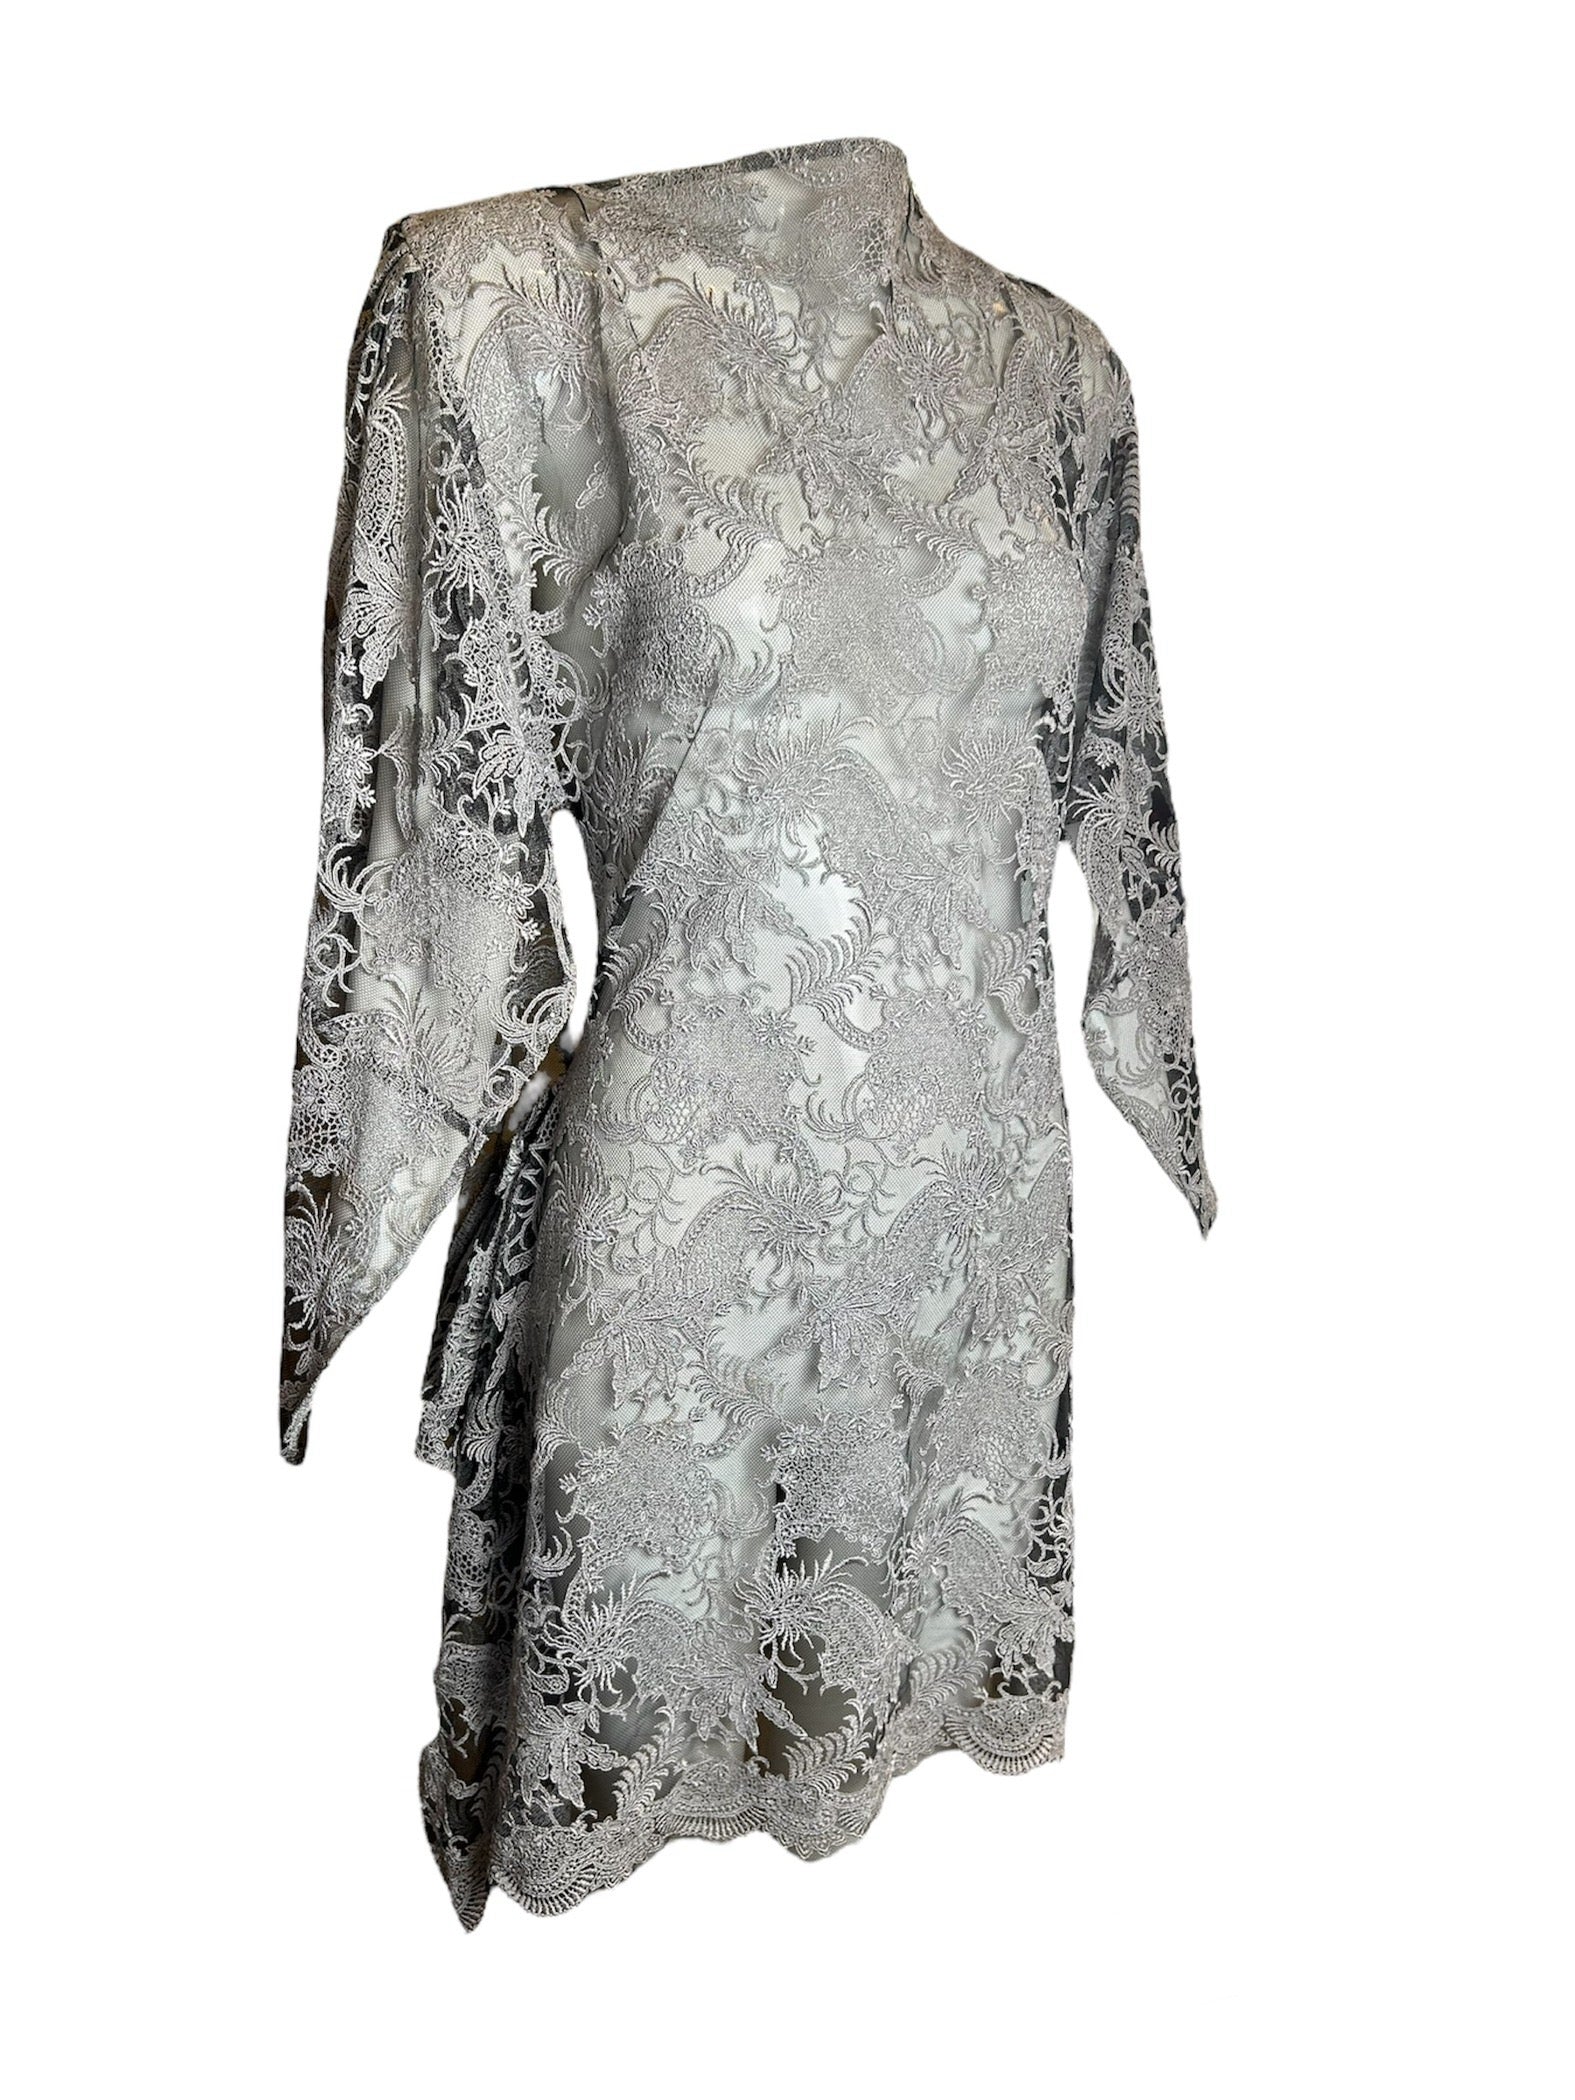 Junya Watanabe Comme Des Garcons Silver Kimono-Style Sleeve Lace Dress DETAIL PHOTO 4 OF 5